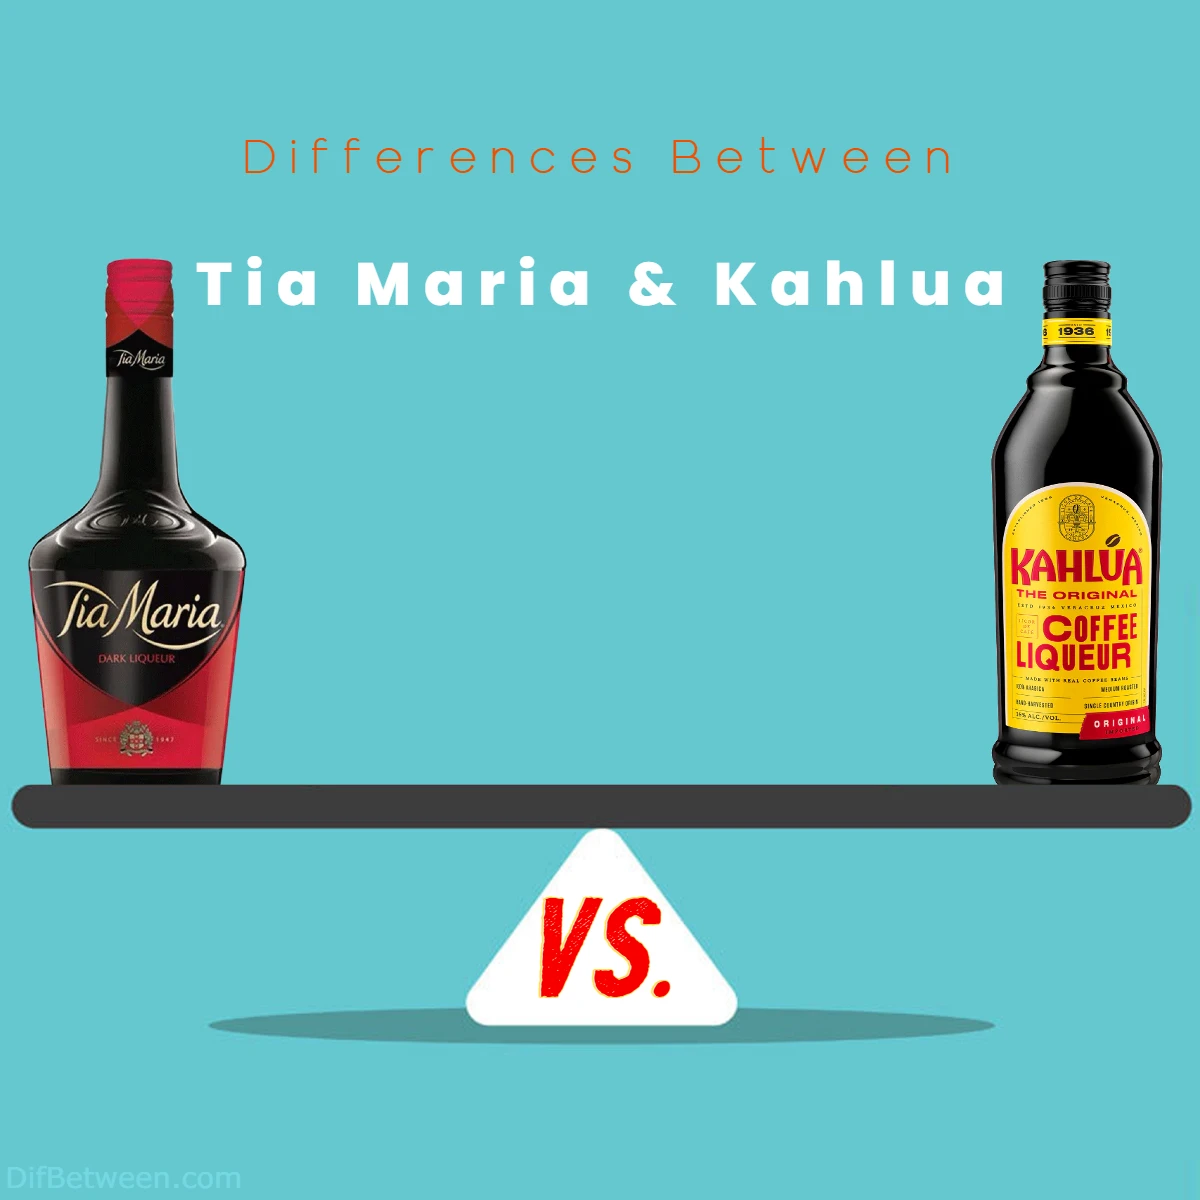 Differences Between Kahlua and Tia Maria